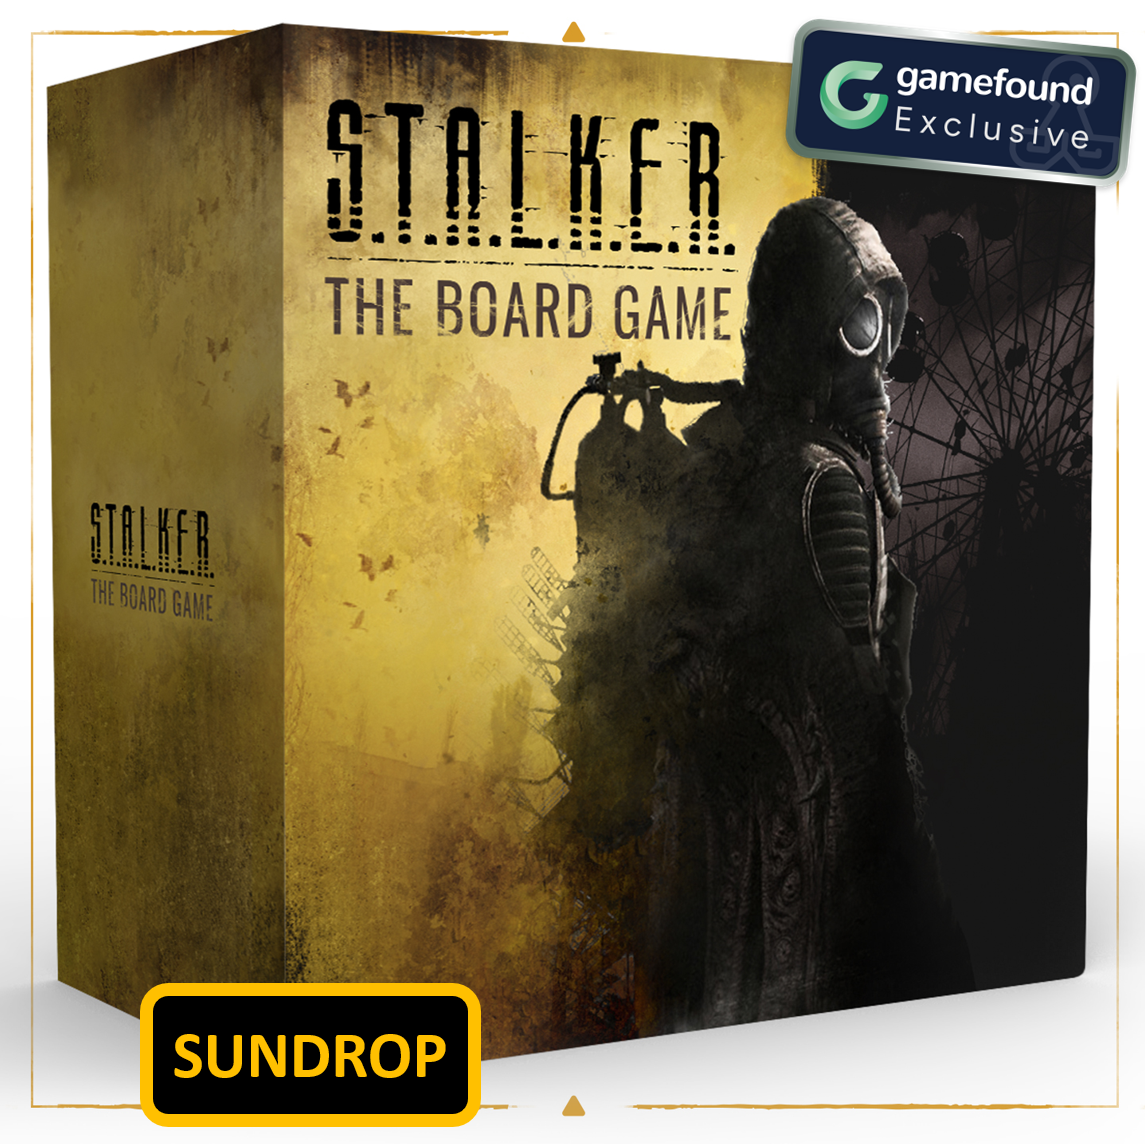 Gamefound Exclusive STALKER: The Board Game core box, sundrop edition